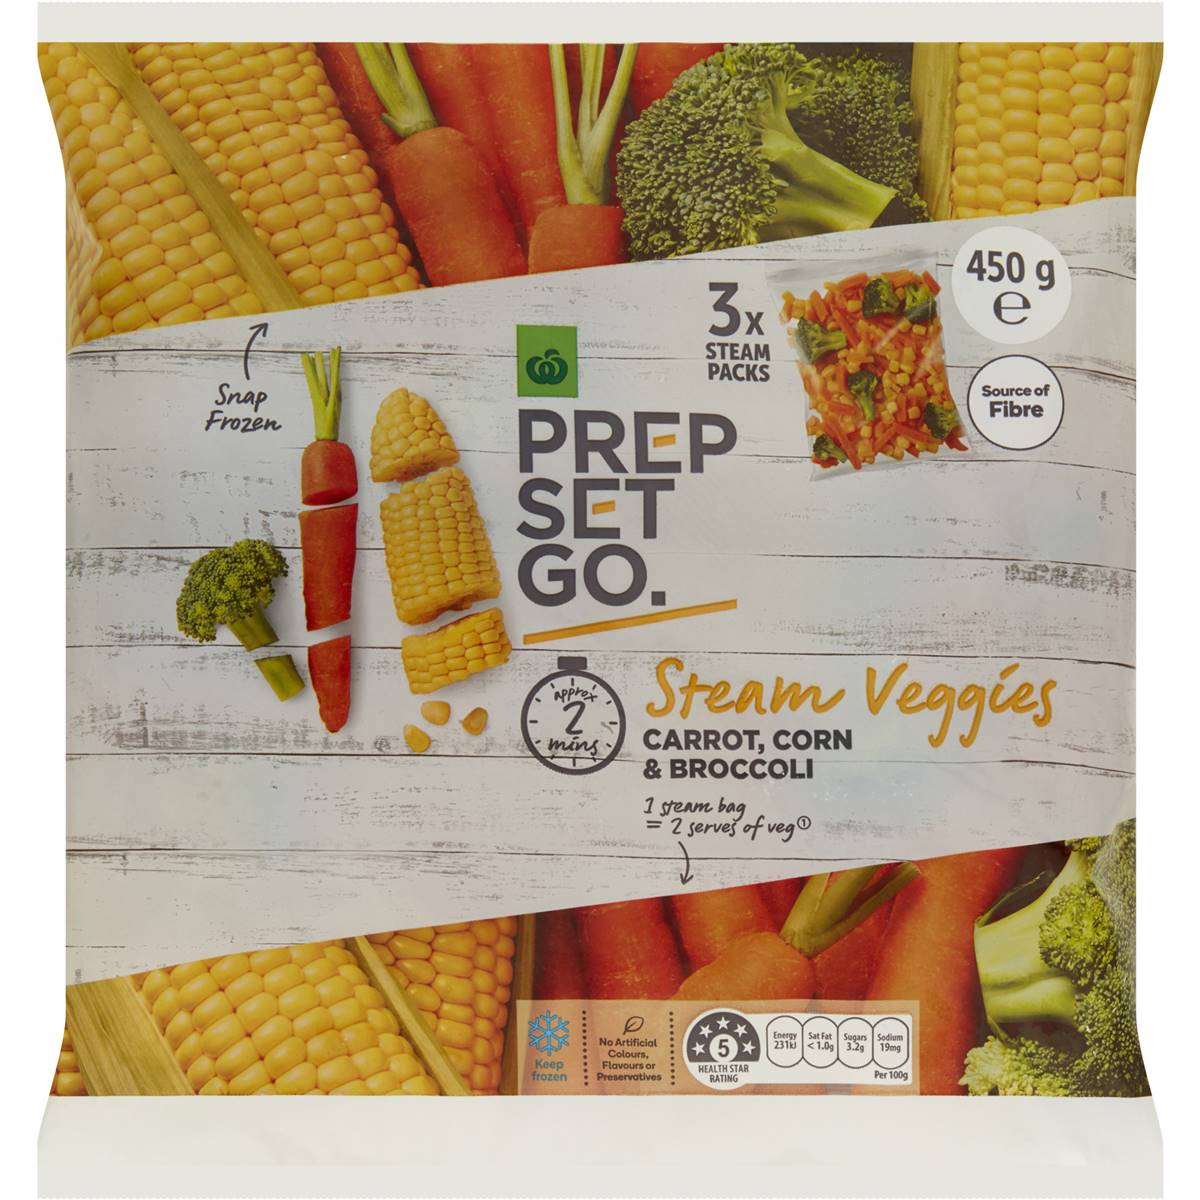 Calories in Woolworths Prep Set Go Frozen Steamed Carrot Corn & Broccoli